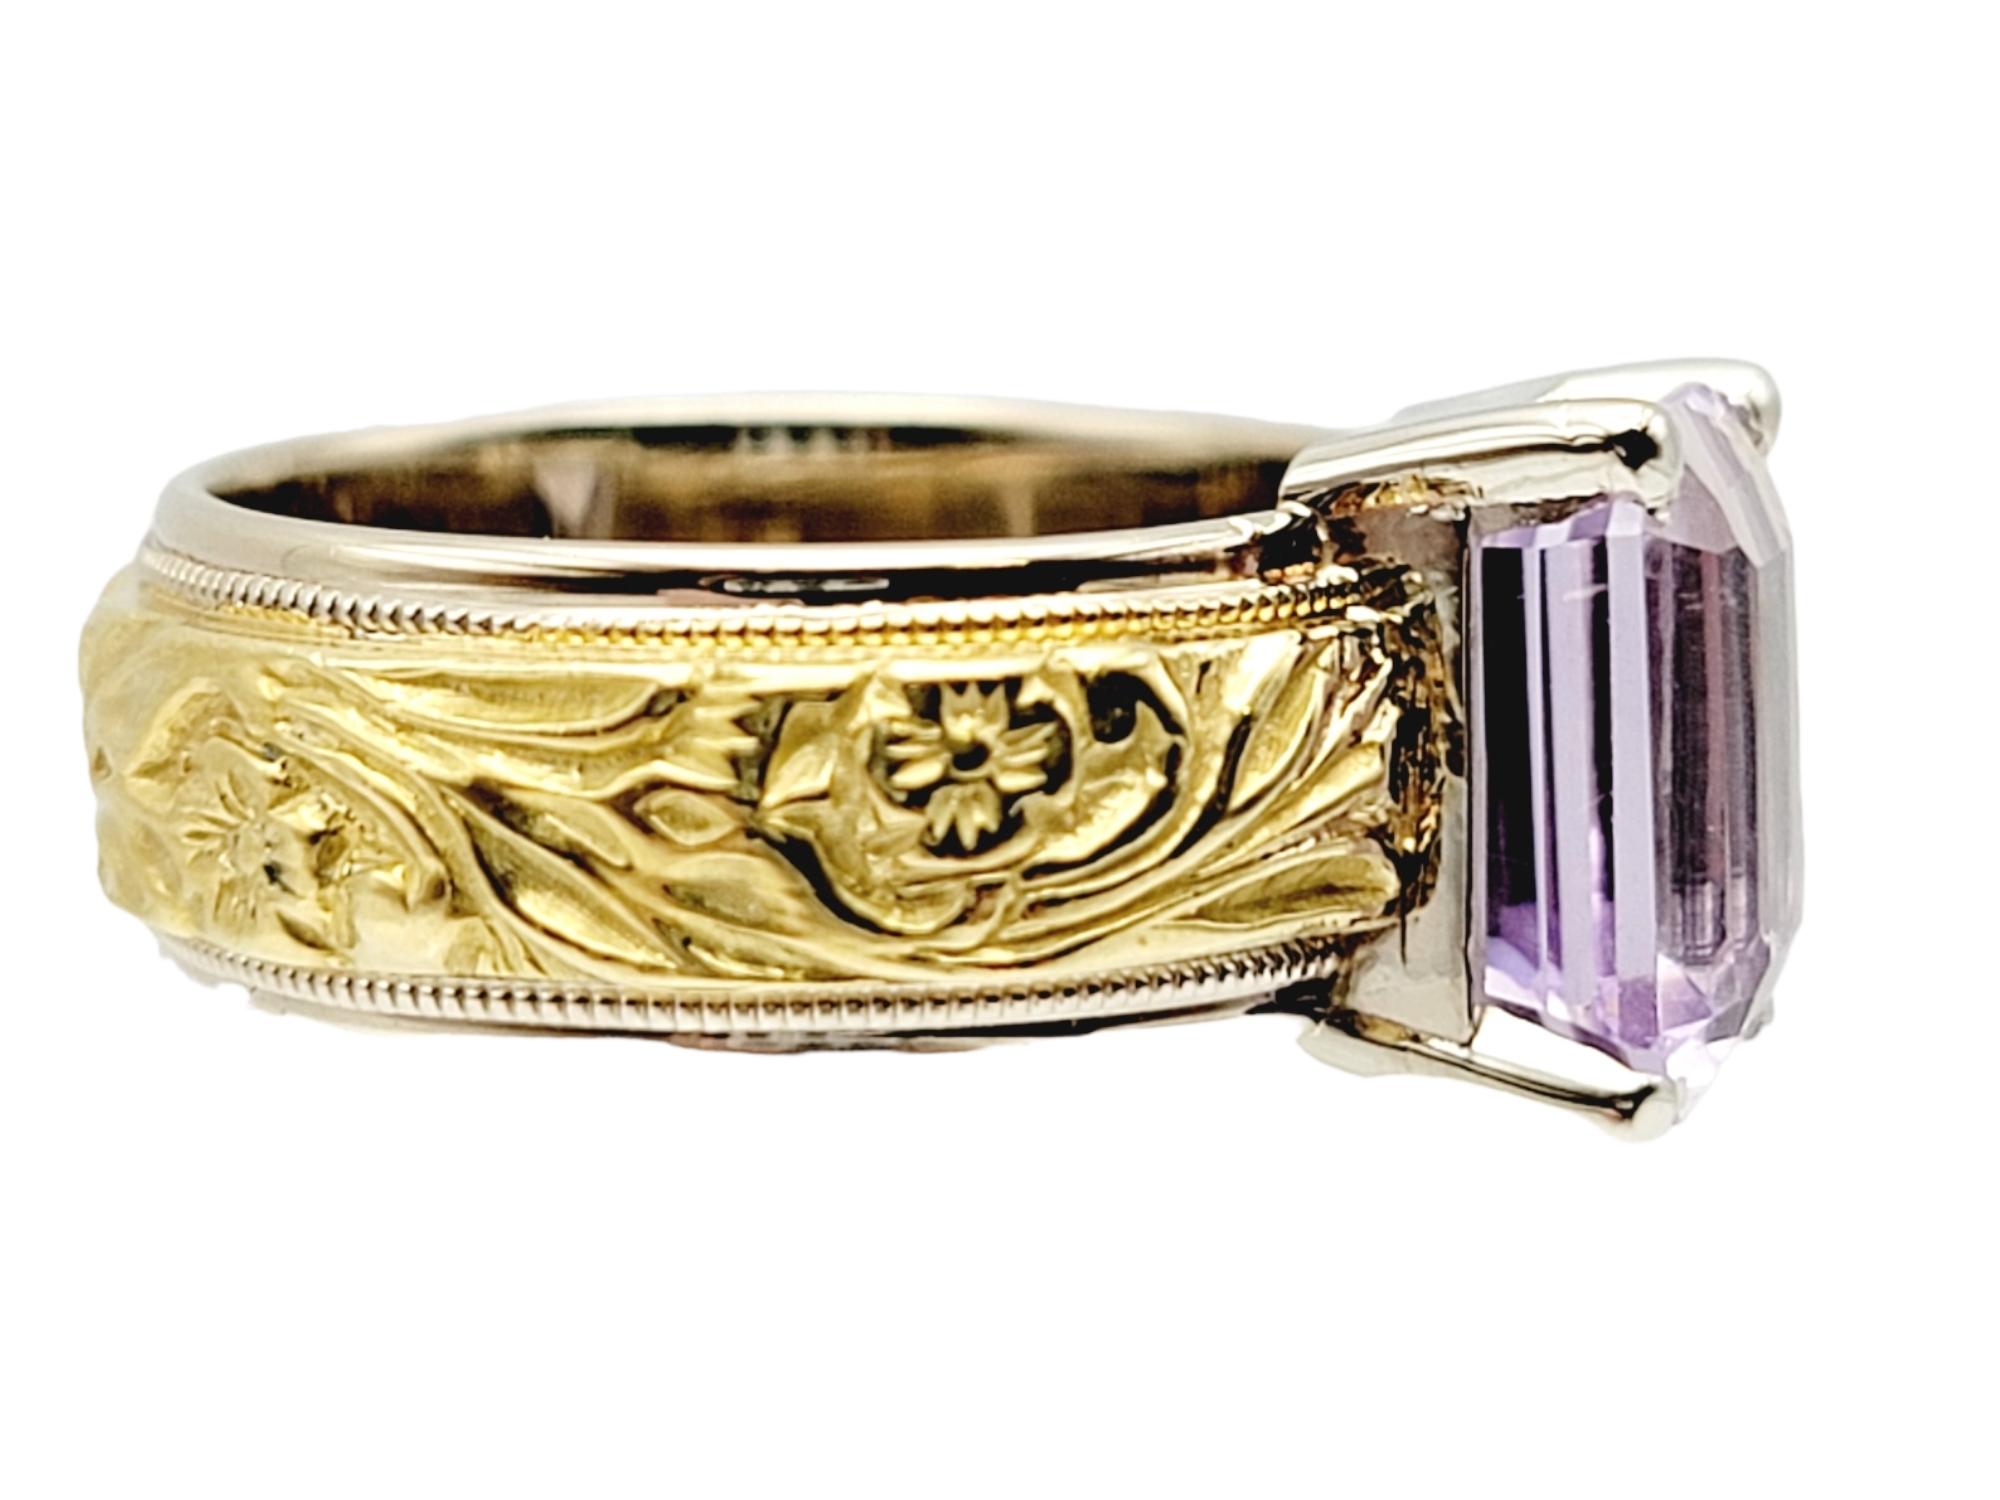 Emerald Cut Amethyst Solitaire Ring with Ornate Engraved Band in 18 Karat Gold In Good Condition For Sale In Scottsdale, AZ